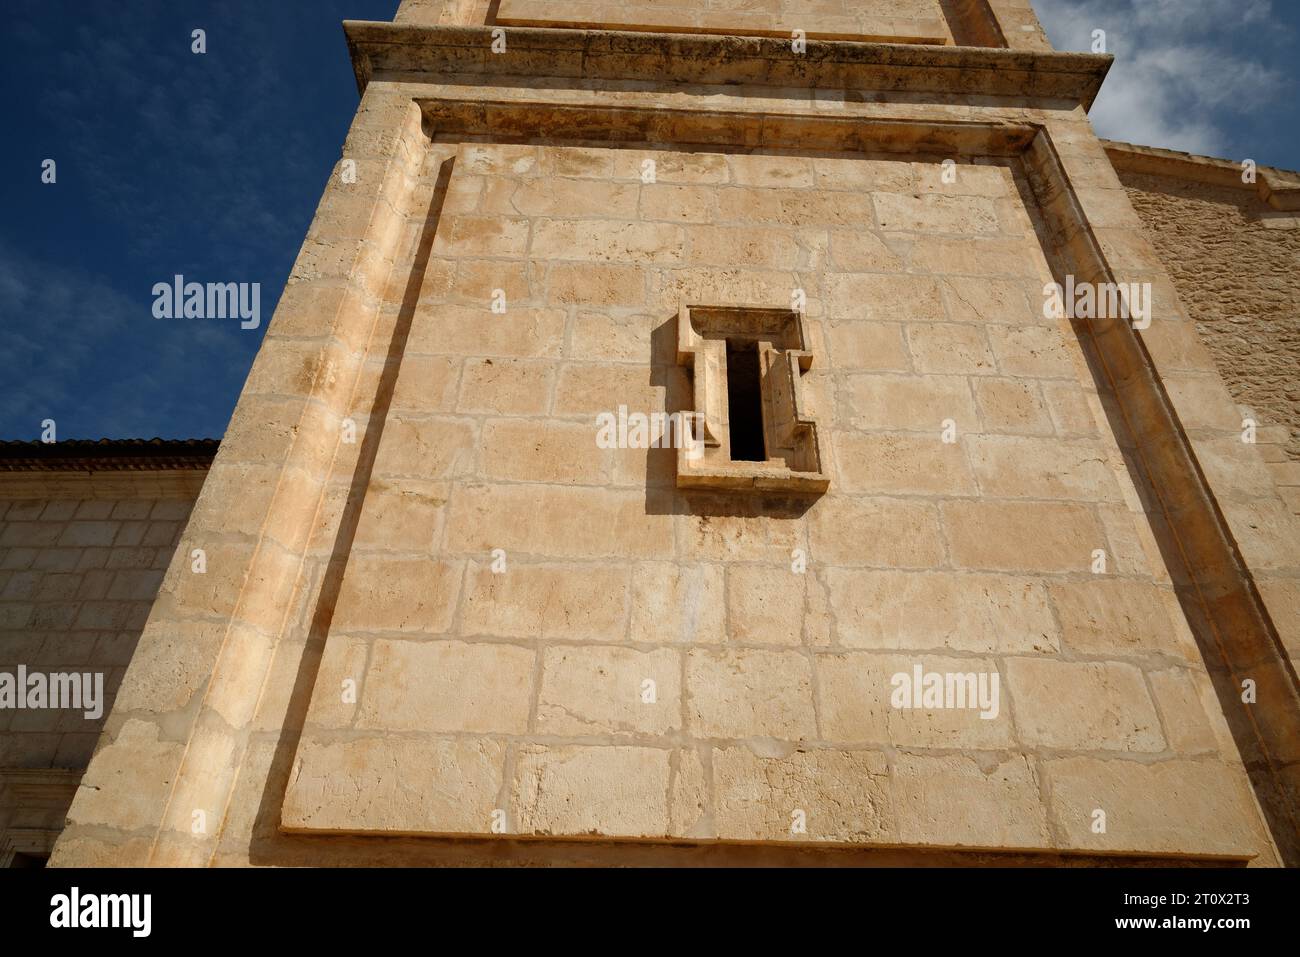 Architectural detail. Nice carved stone around a slit window opening. Letter I for illustration purpose. Stock Photo